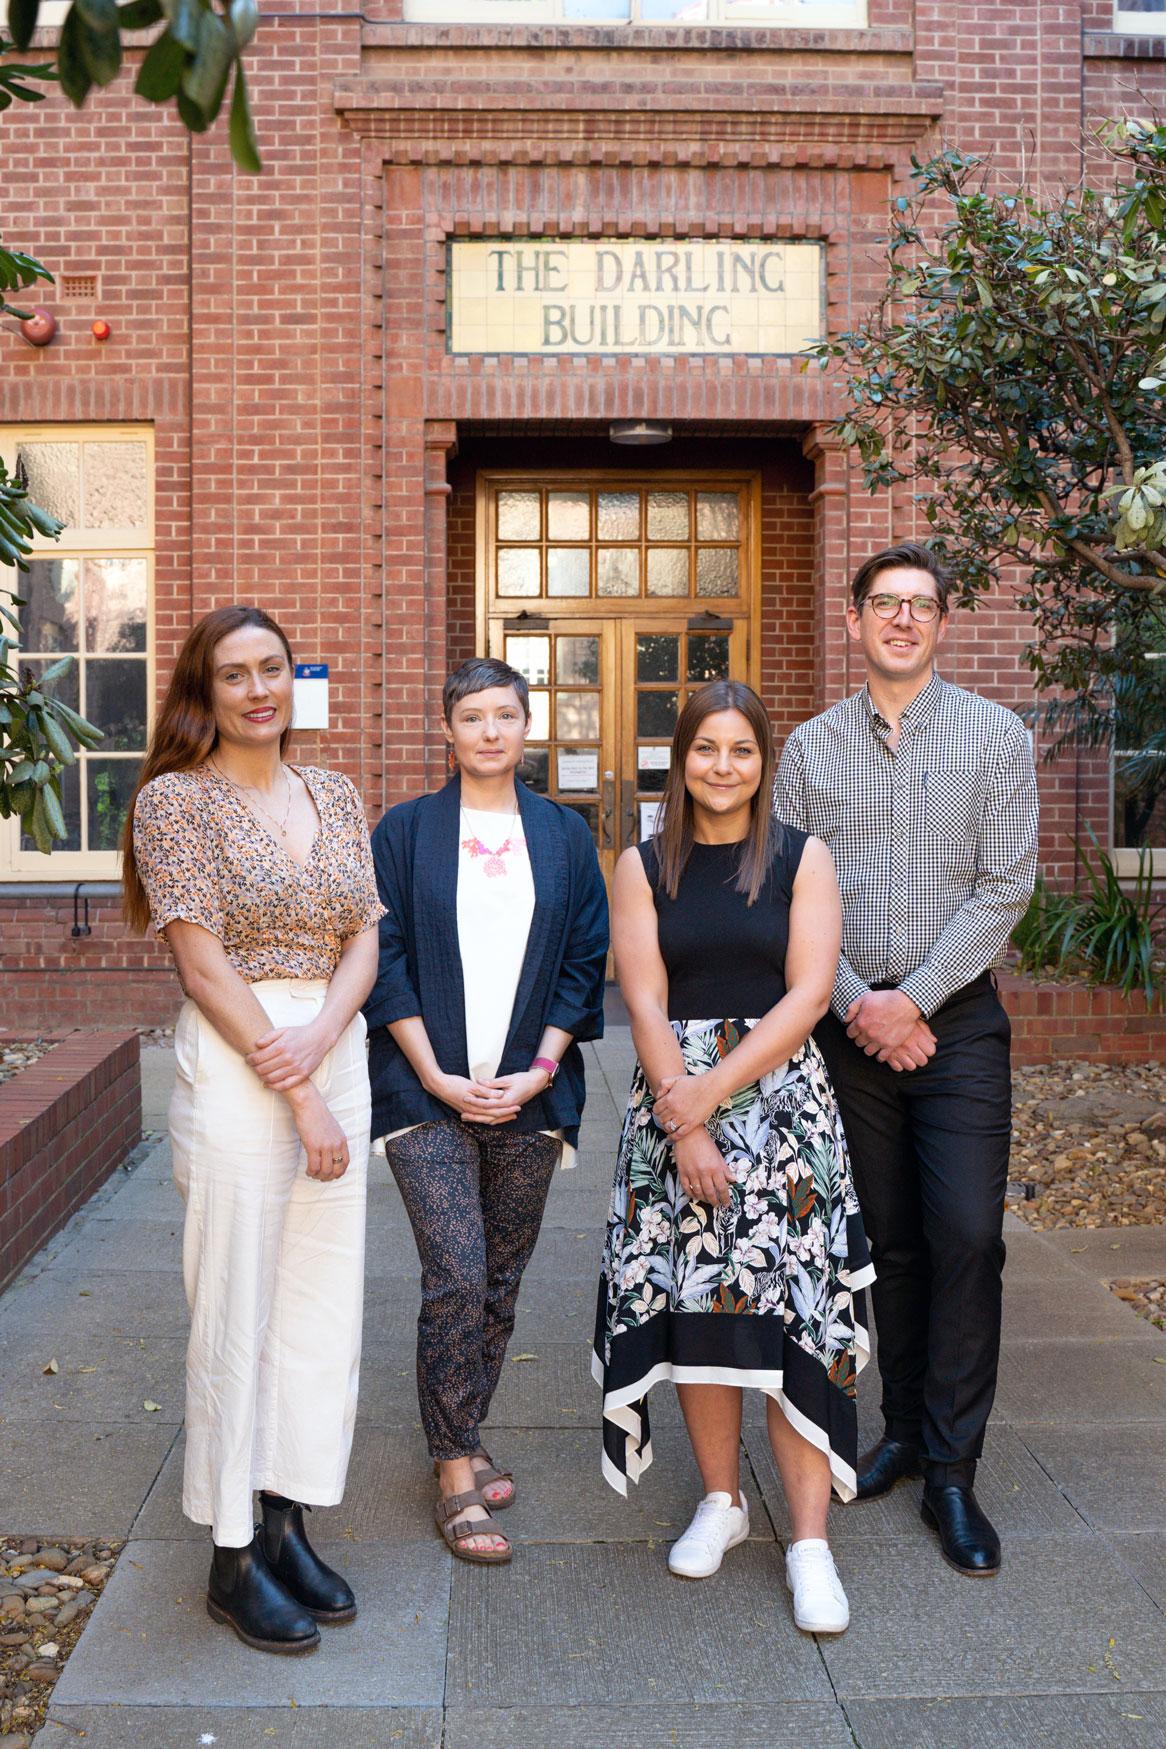 SA Tall Poppy Award winners from the University of Adelaide. L to R Dr Hannah Wardill, Dr Alice Jones, Dr Catia Malvaso and Dr Dominic McAfee.